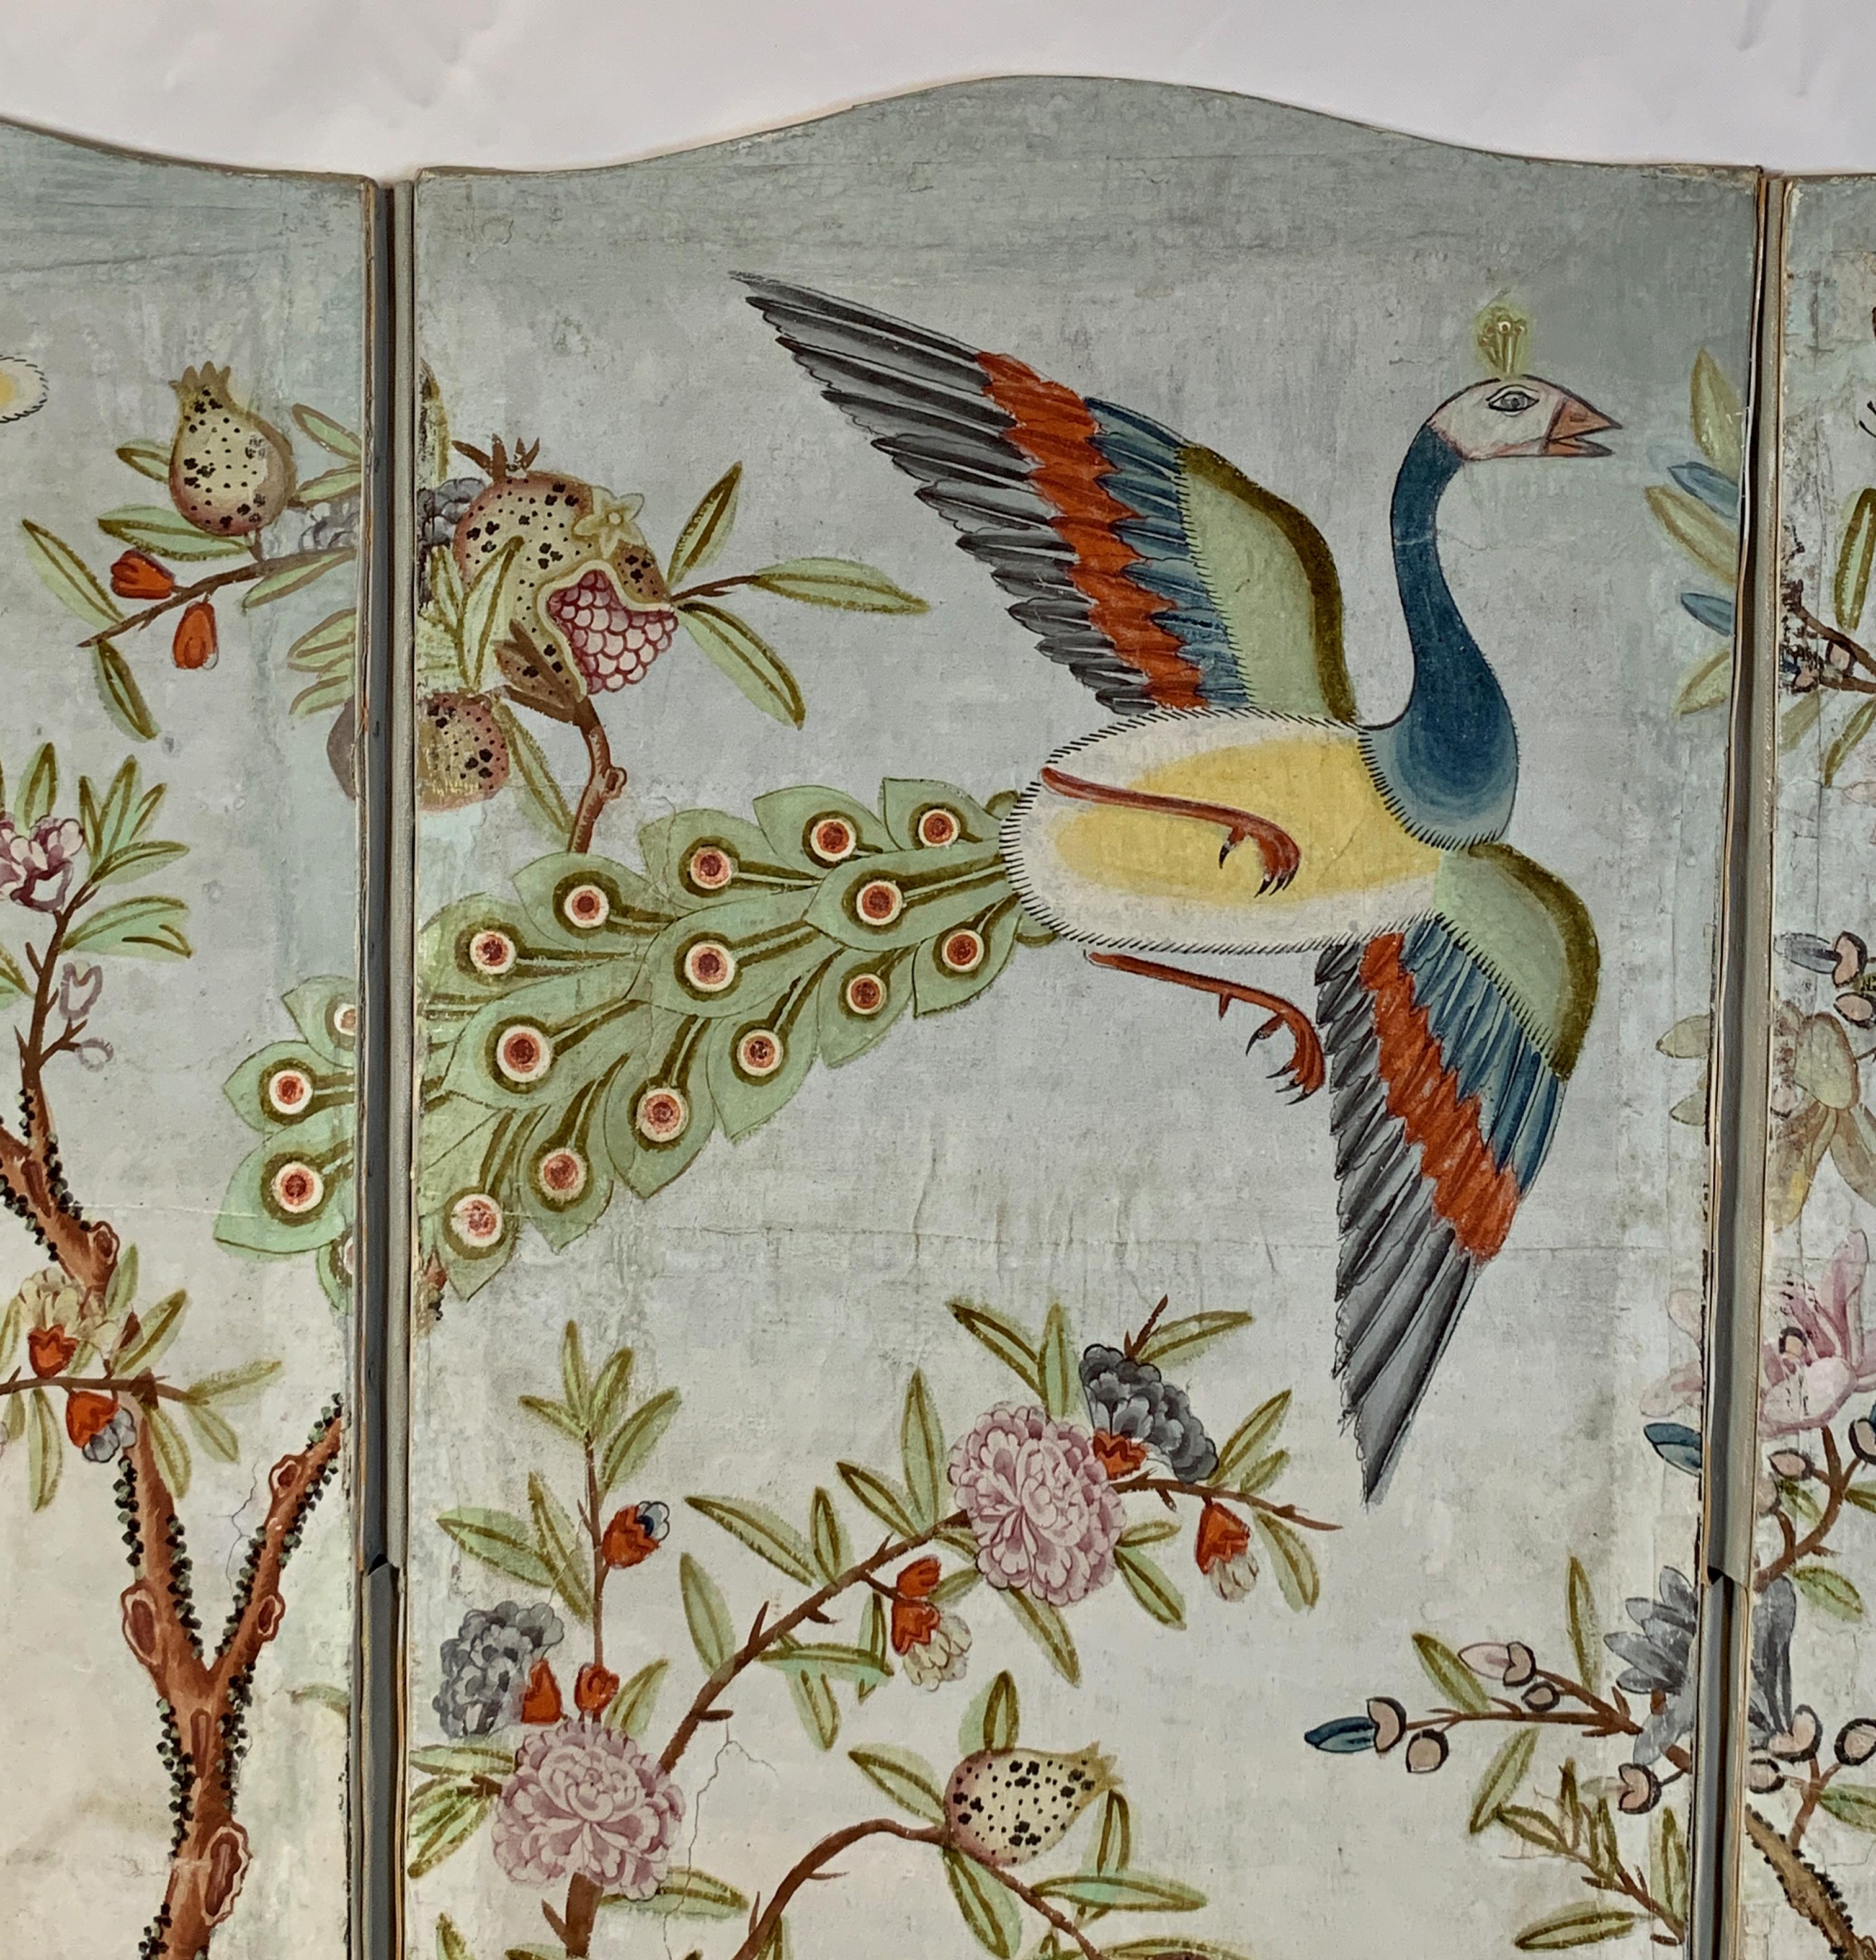 20th Century Hand Painted Four Panel Folding Screen in the Style of Gracie or de Gournay